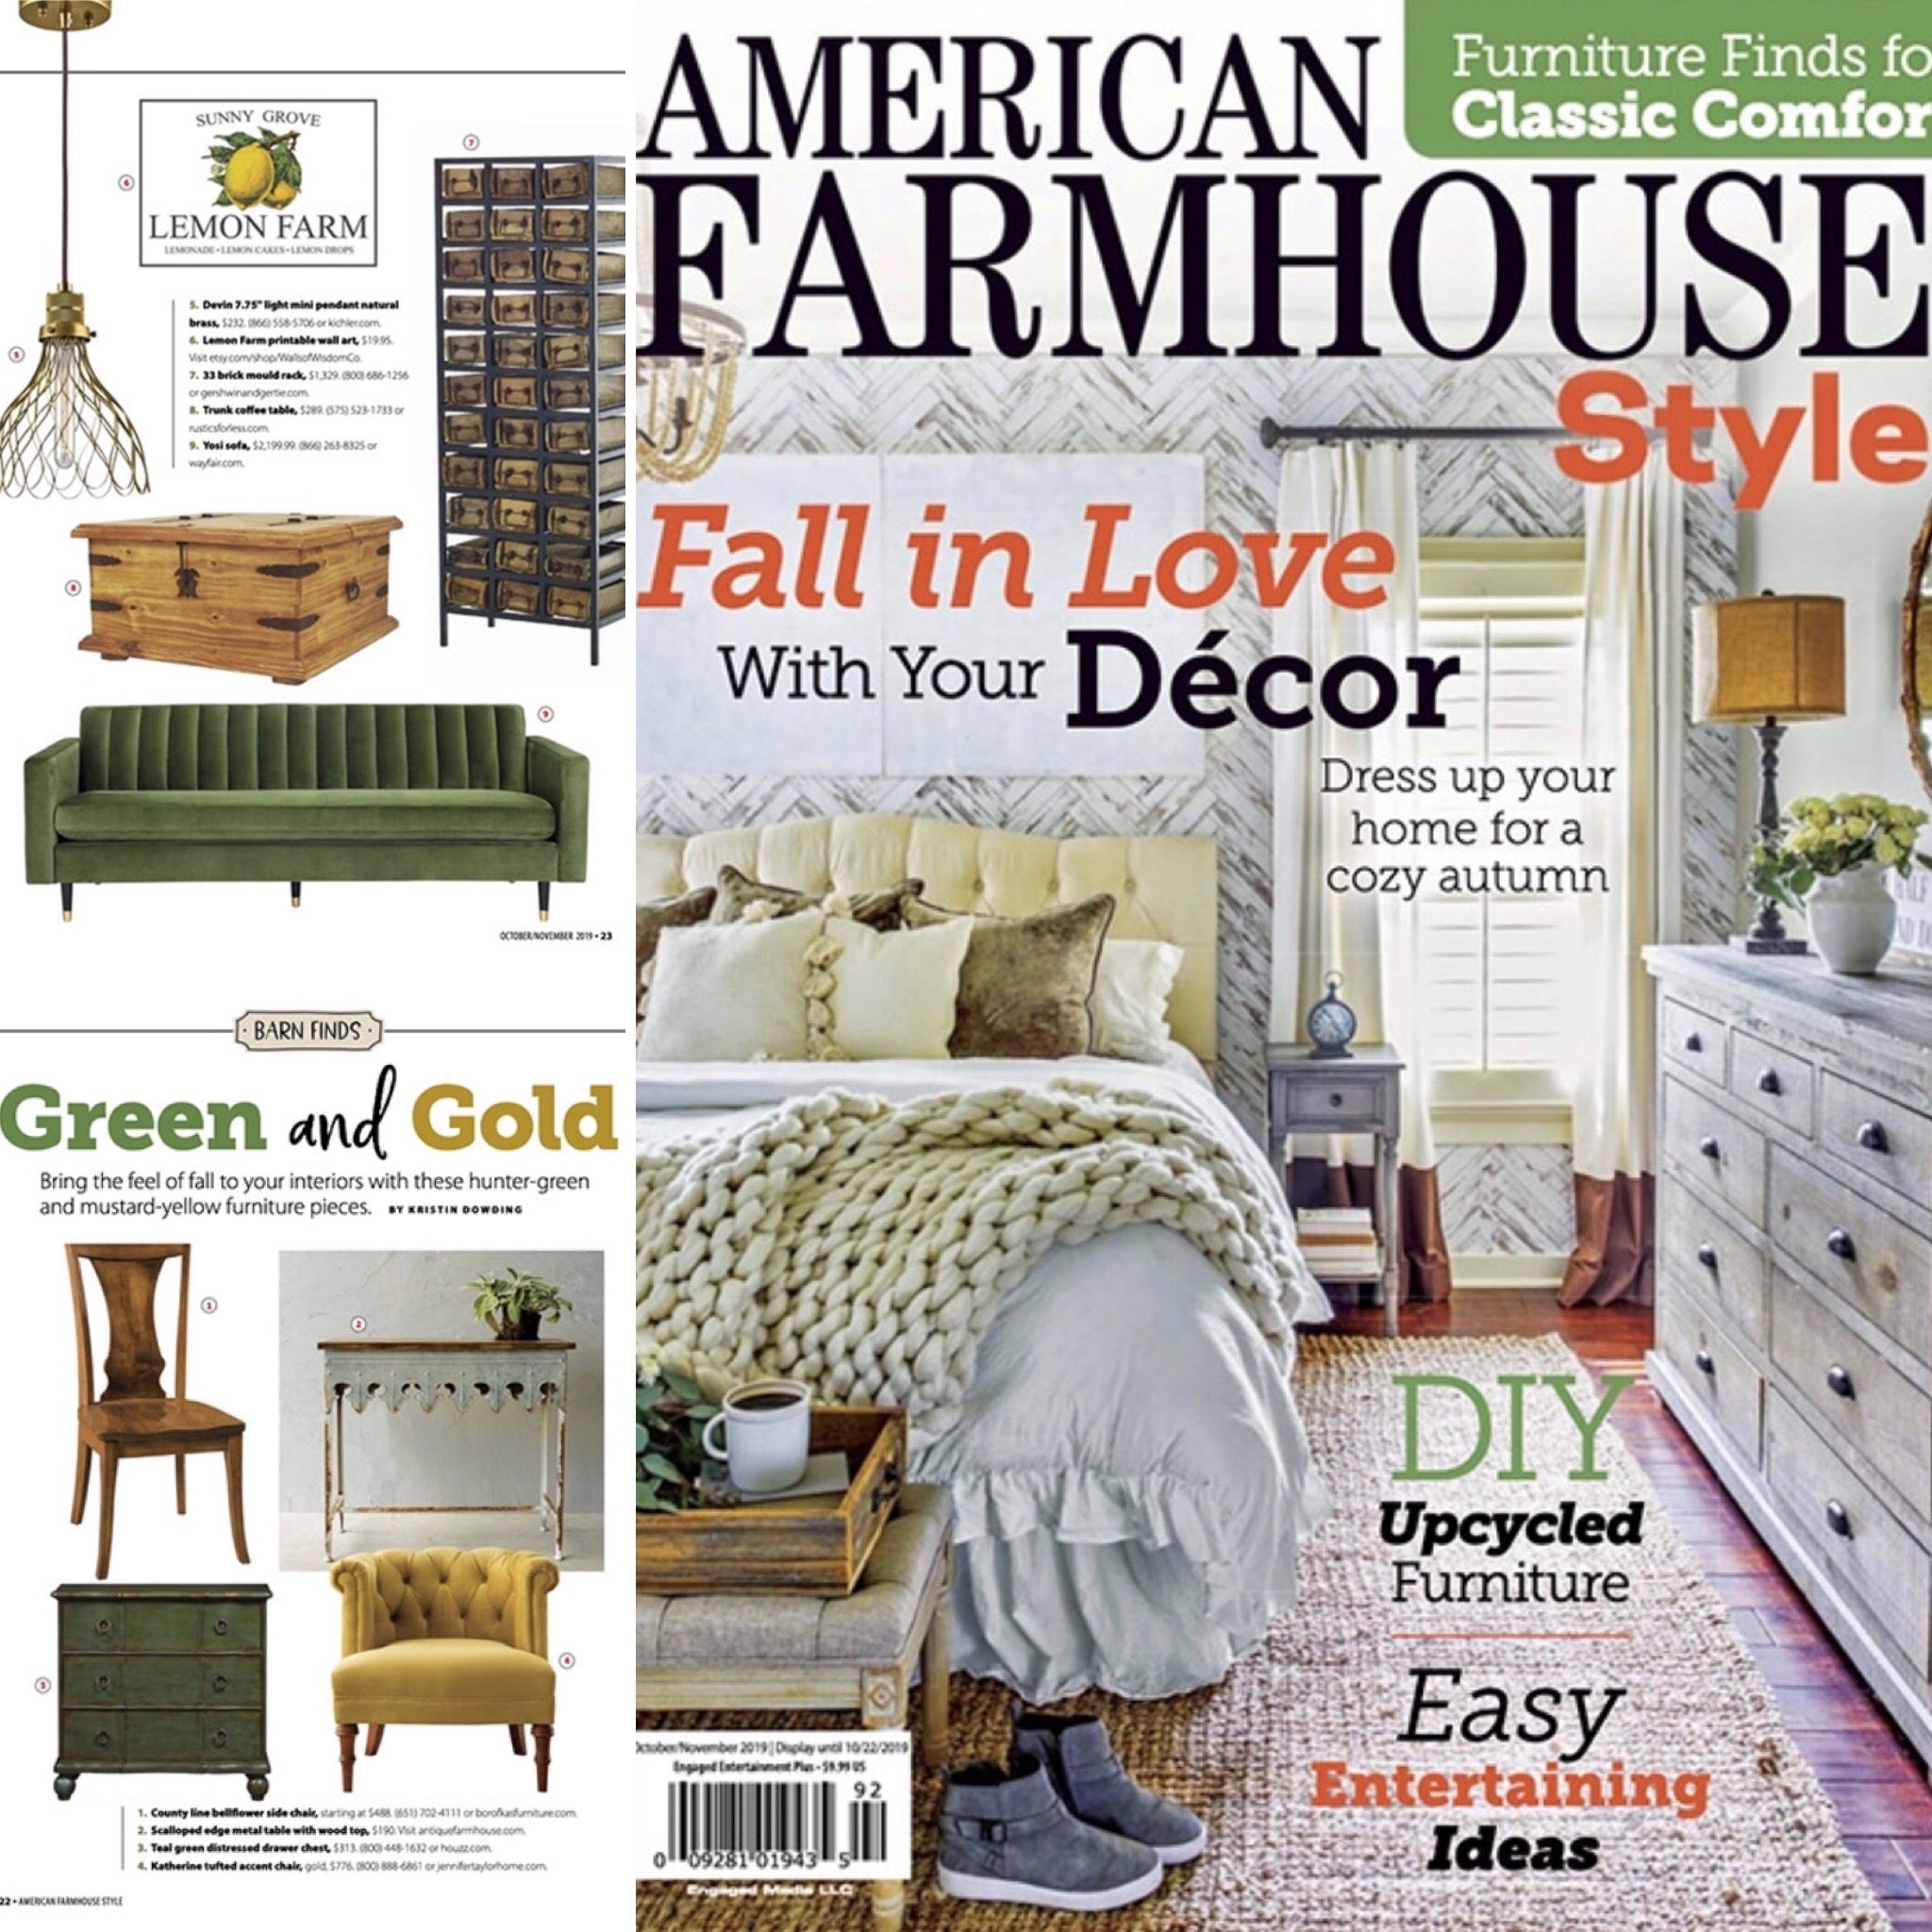 Fall in Love With Your Decor  / @americanfarmhousestyle